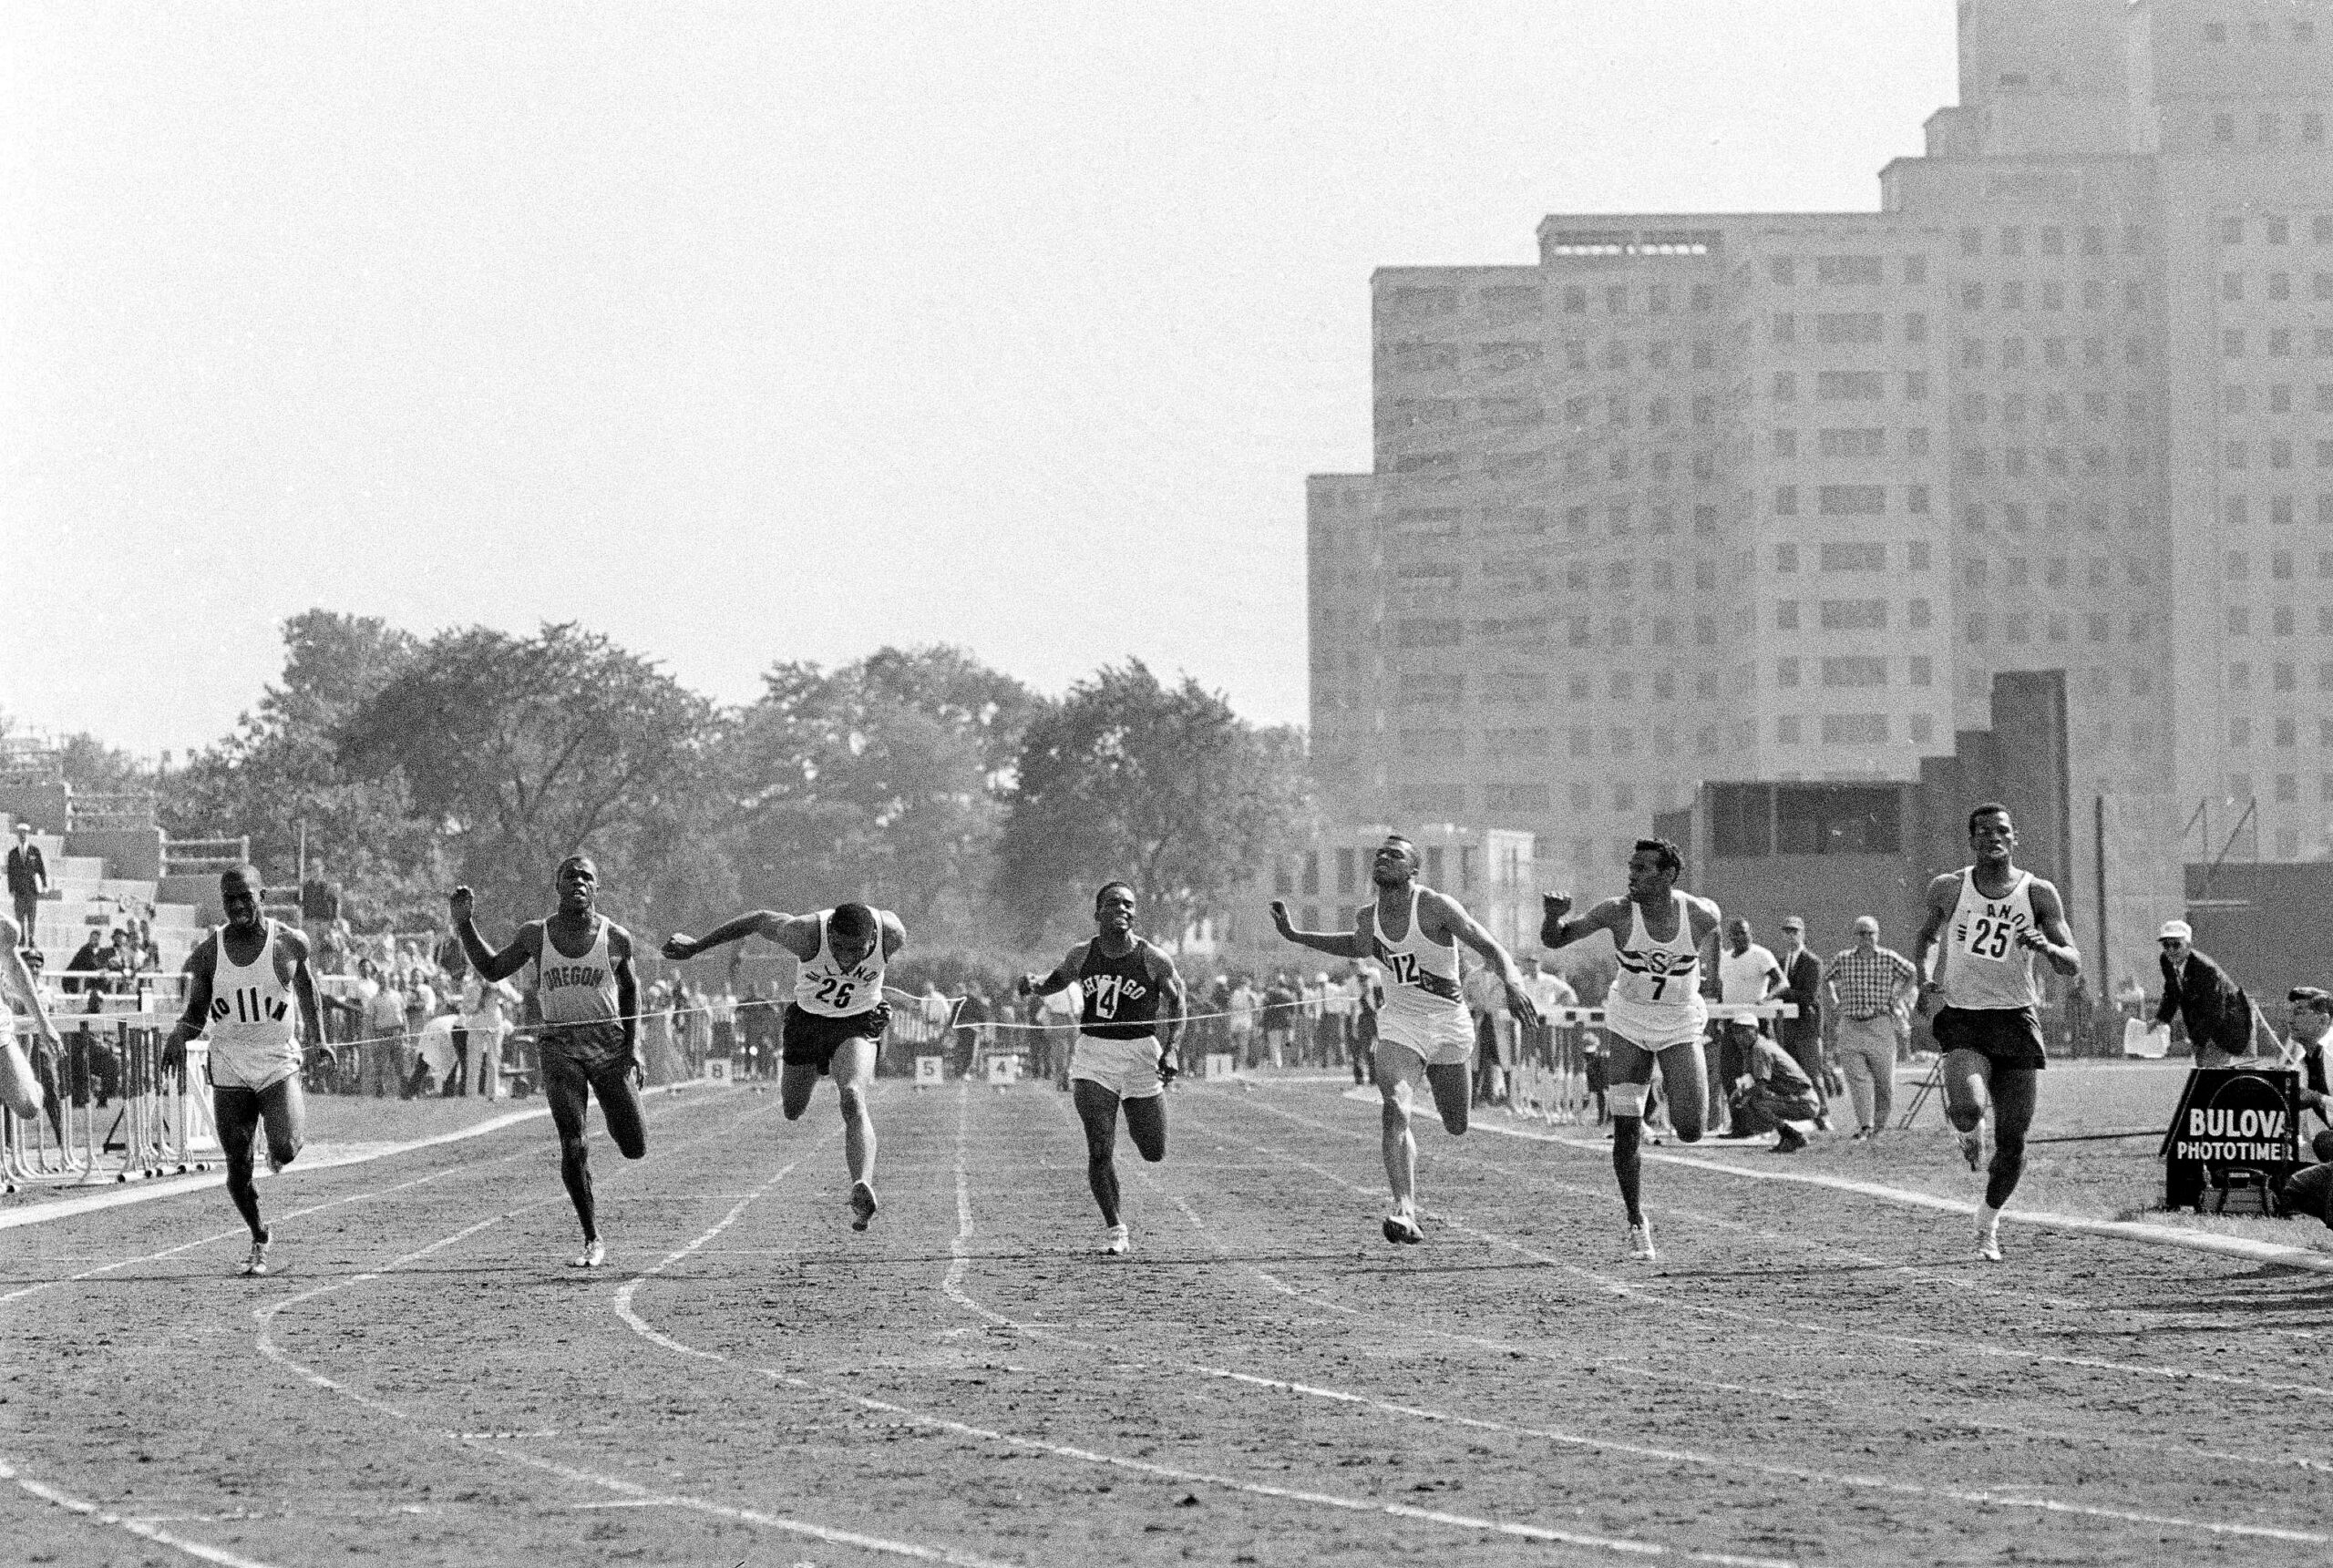 Frank Budd, right, of Villanova wins the 100-yard dash at the National AAU Track and Field championships in Ward's Island, New York, June 24, 1961. His teammate Paul Drayton, third from left, came in second, and David James, second from right, of Southern Calif. Striders, third. From left: Paul Winder, Morgan State College; Roscoe Cook Jr., Emerald Empire A.C.; Drayton; Ira Murchison, University of Chicago; Lt. Edward Collymore, USMC; James and Budd. (AP Photo)